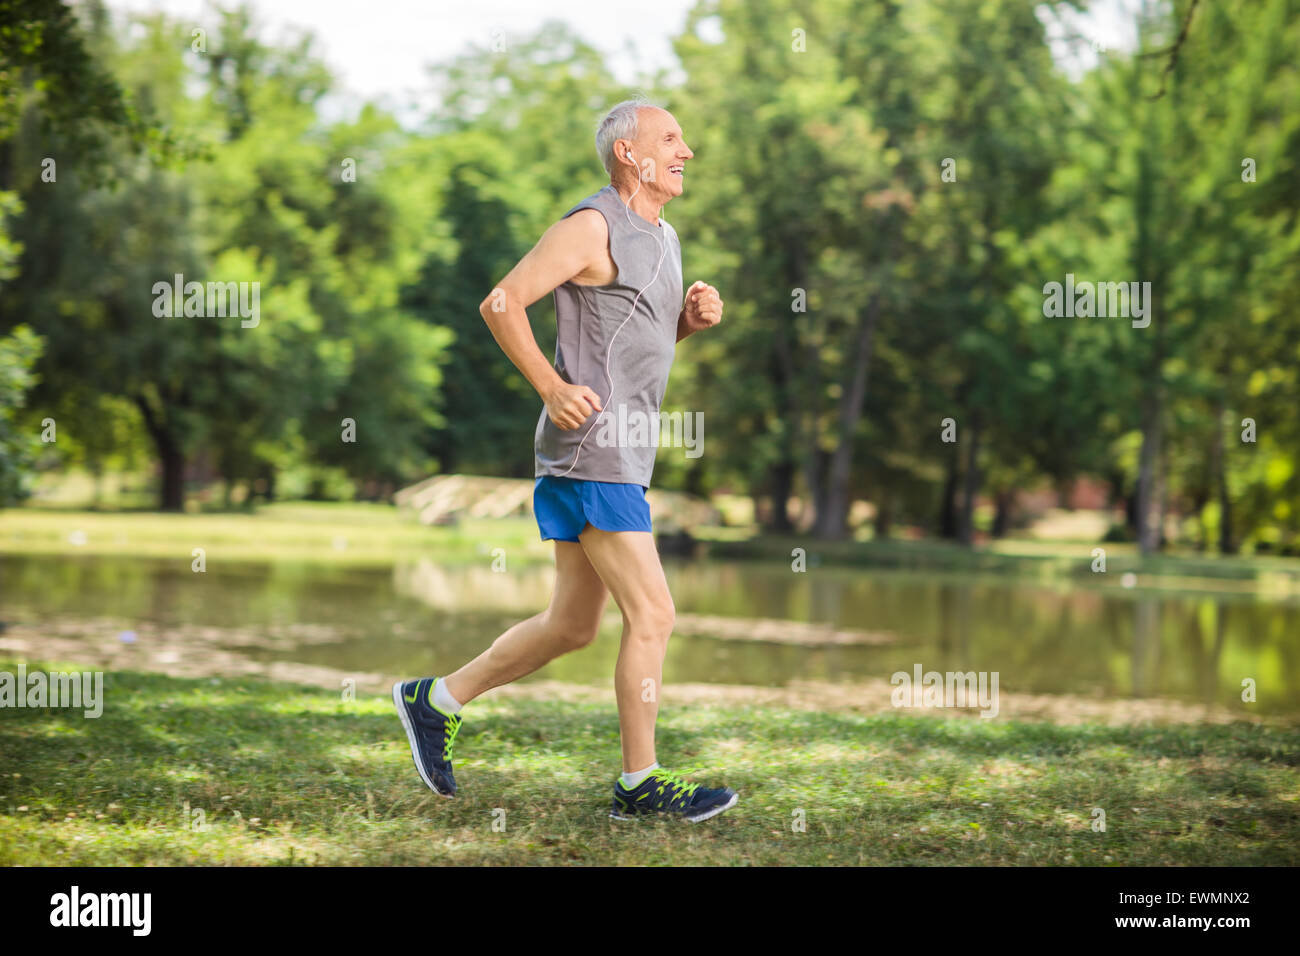 Profile shot of an active senior jogging in a park and listening to music on headphones Stock Photo